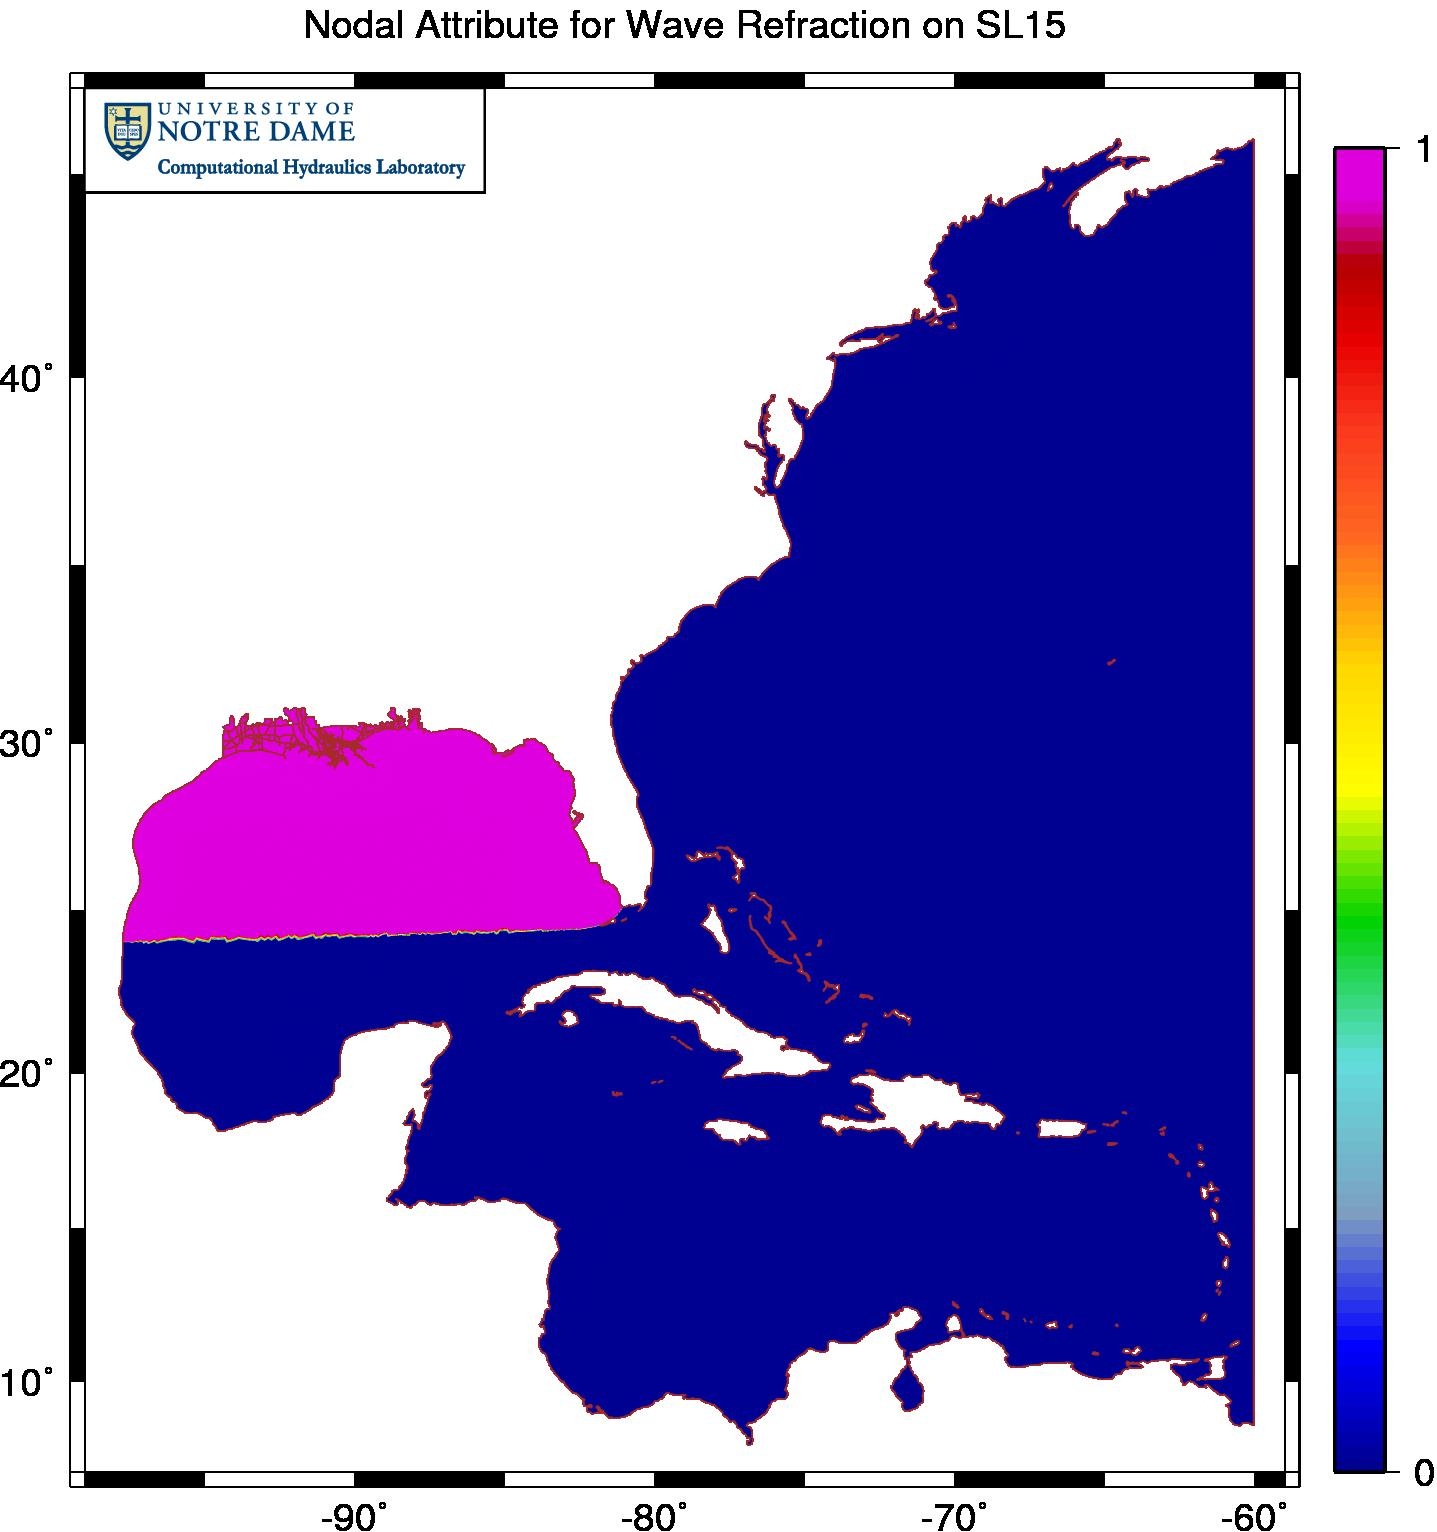 Example of enabling wave refraction only near the region of interest in the northern Gulf of Mexico.